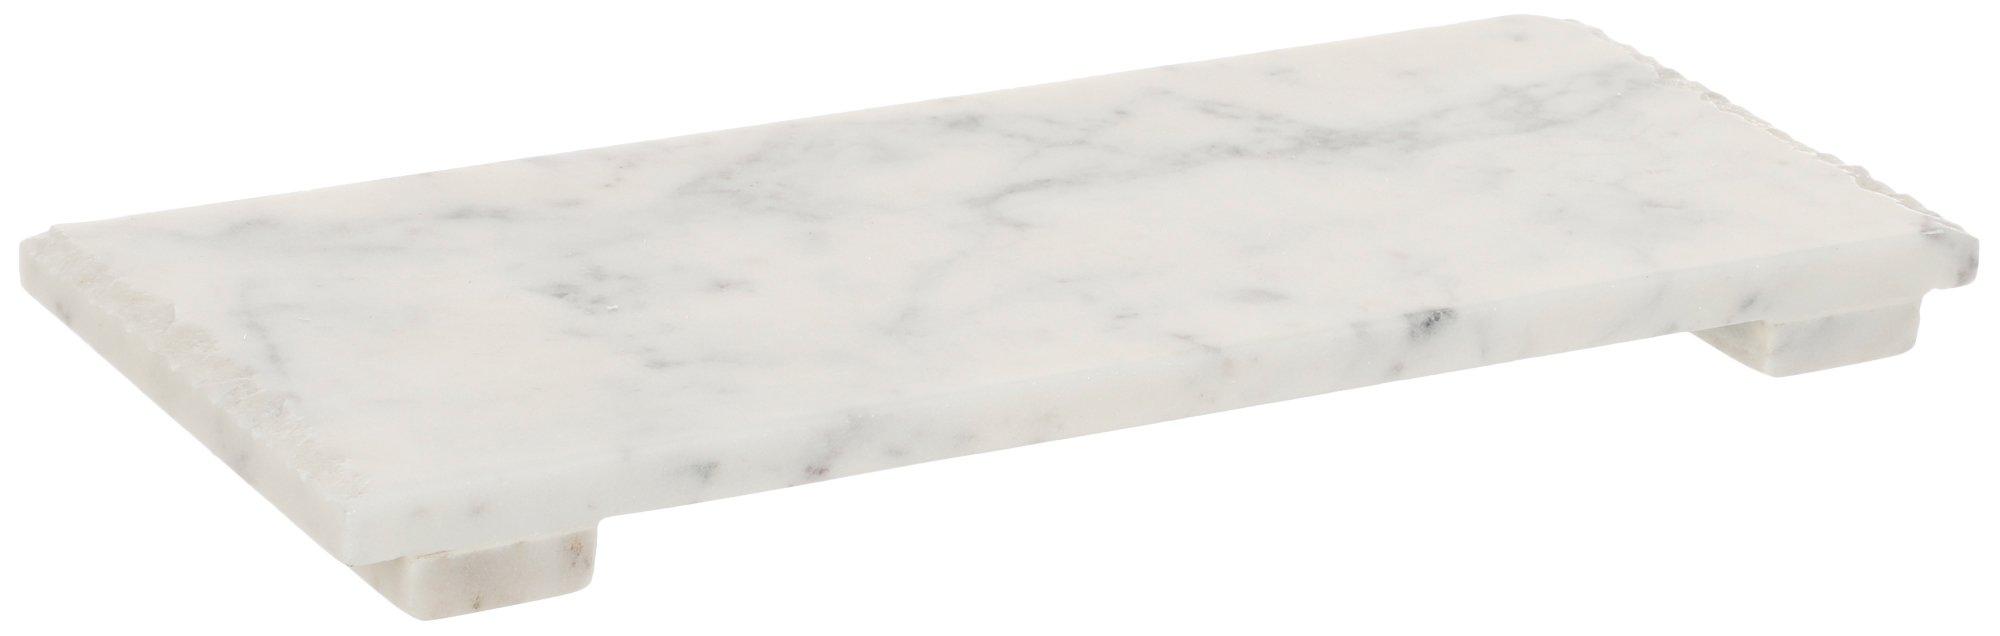 14x6 Marble Serving Tray